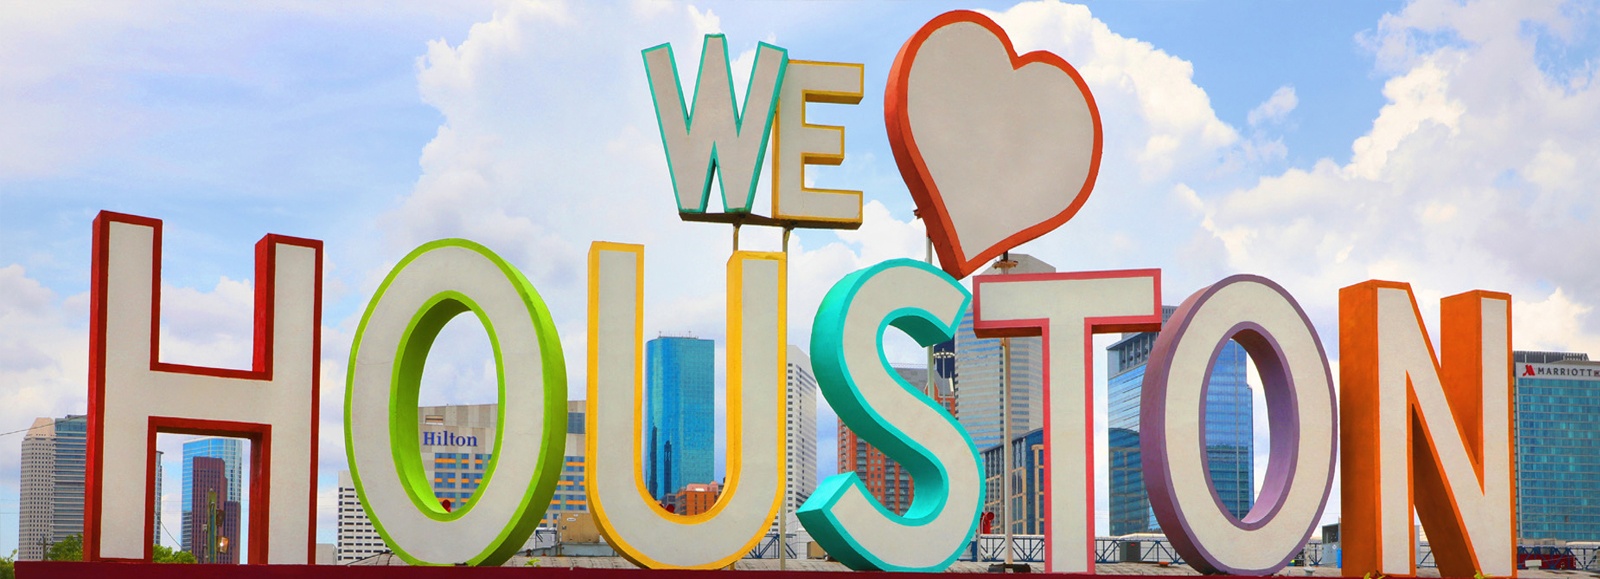 Rooftop display of giant letters saying We Heart Houston